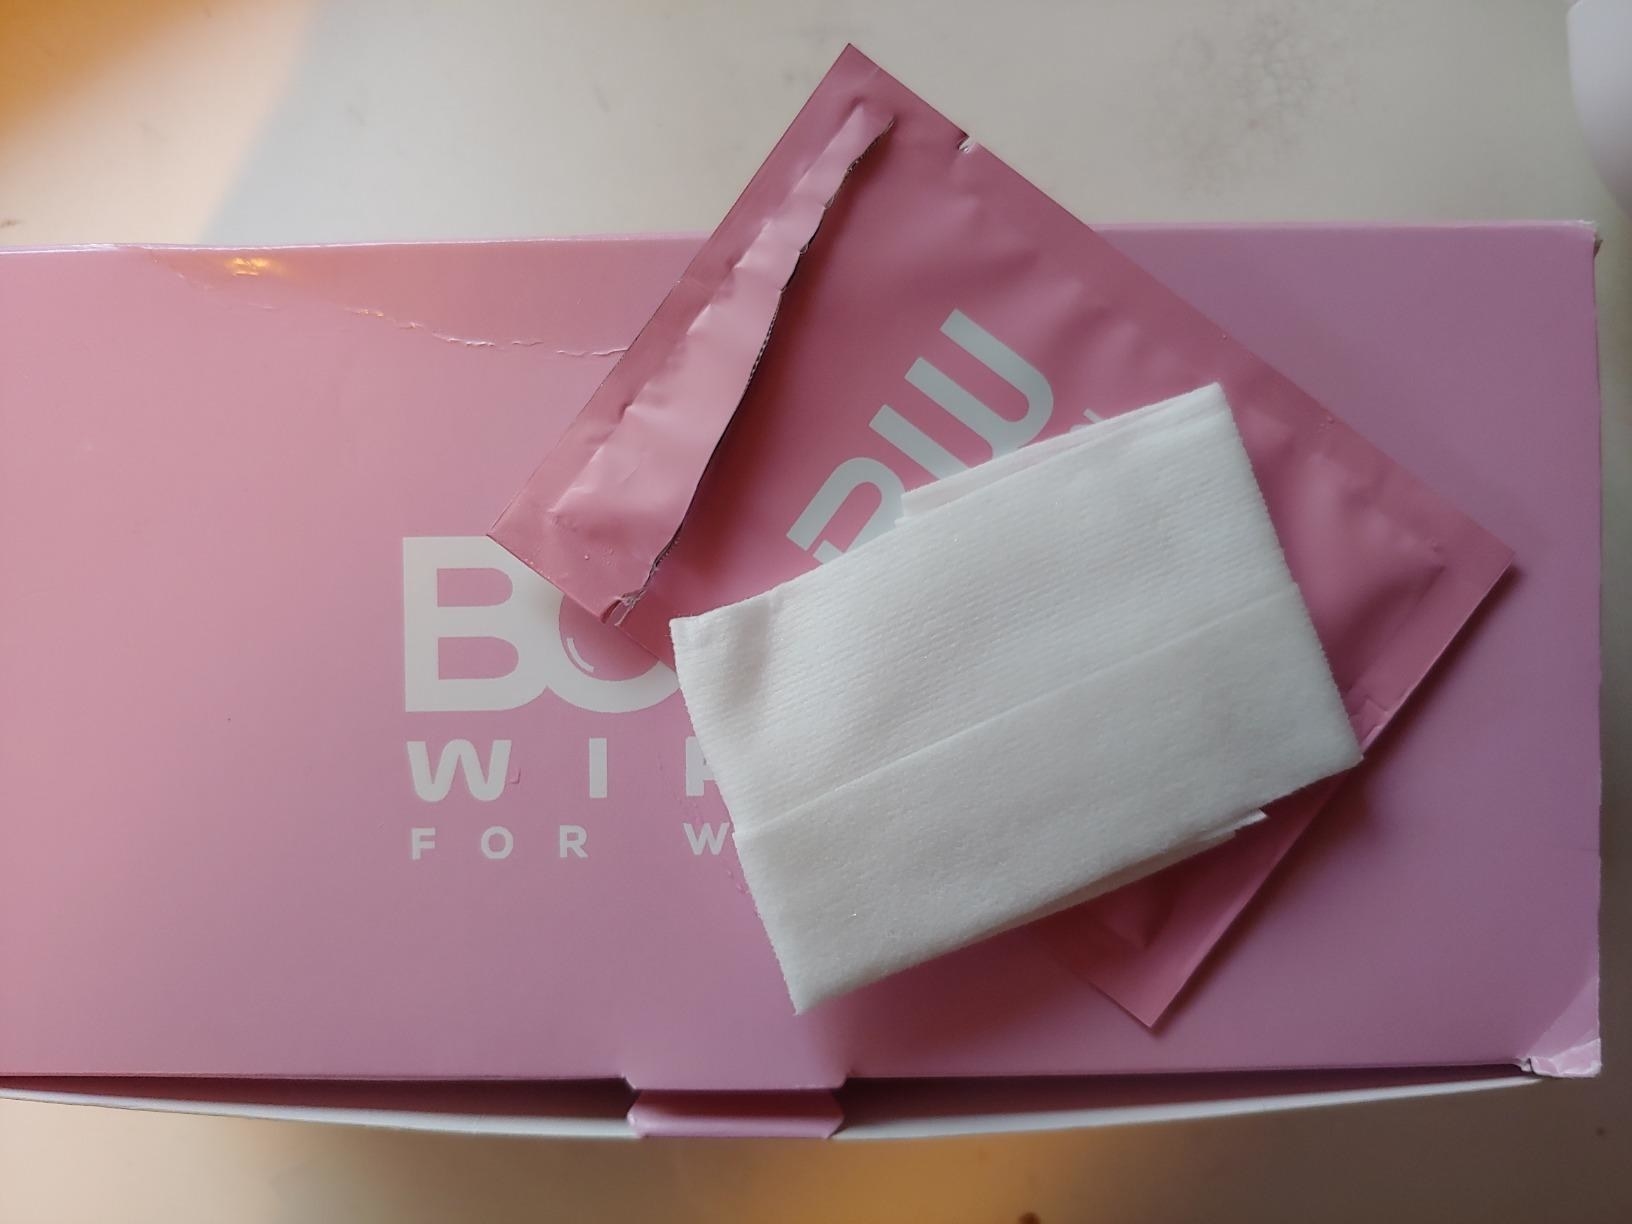 An open individually wrapped booty wipe